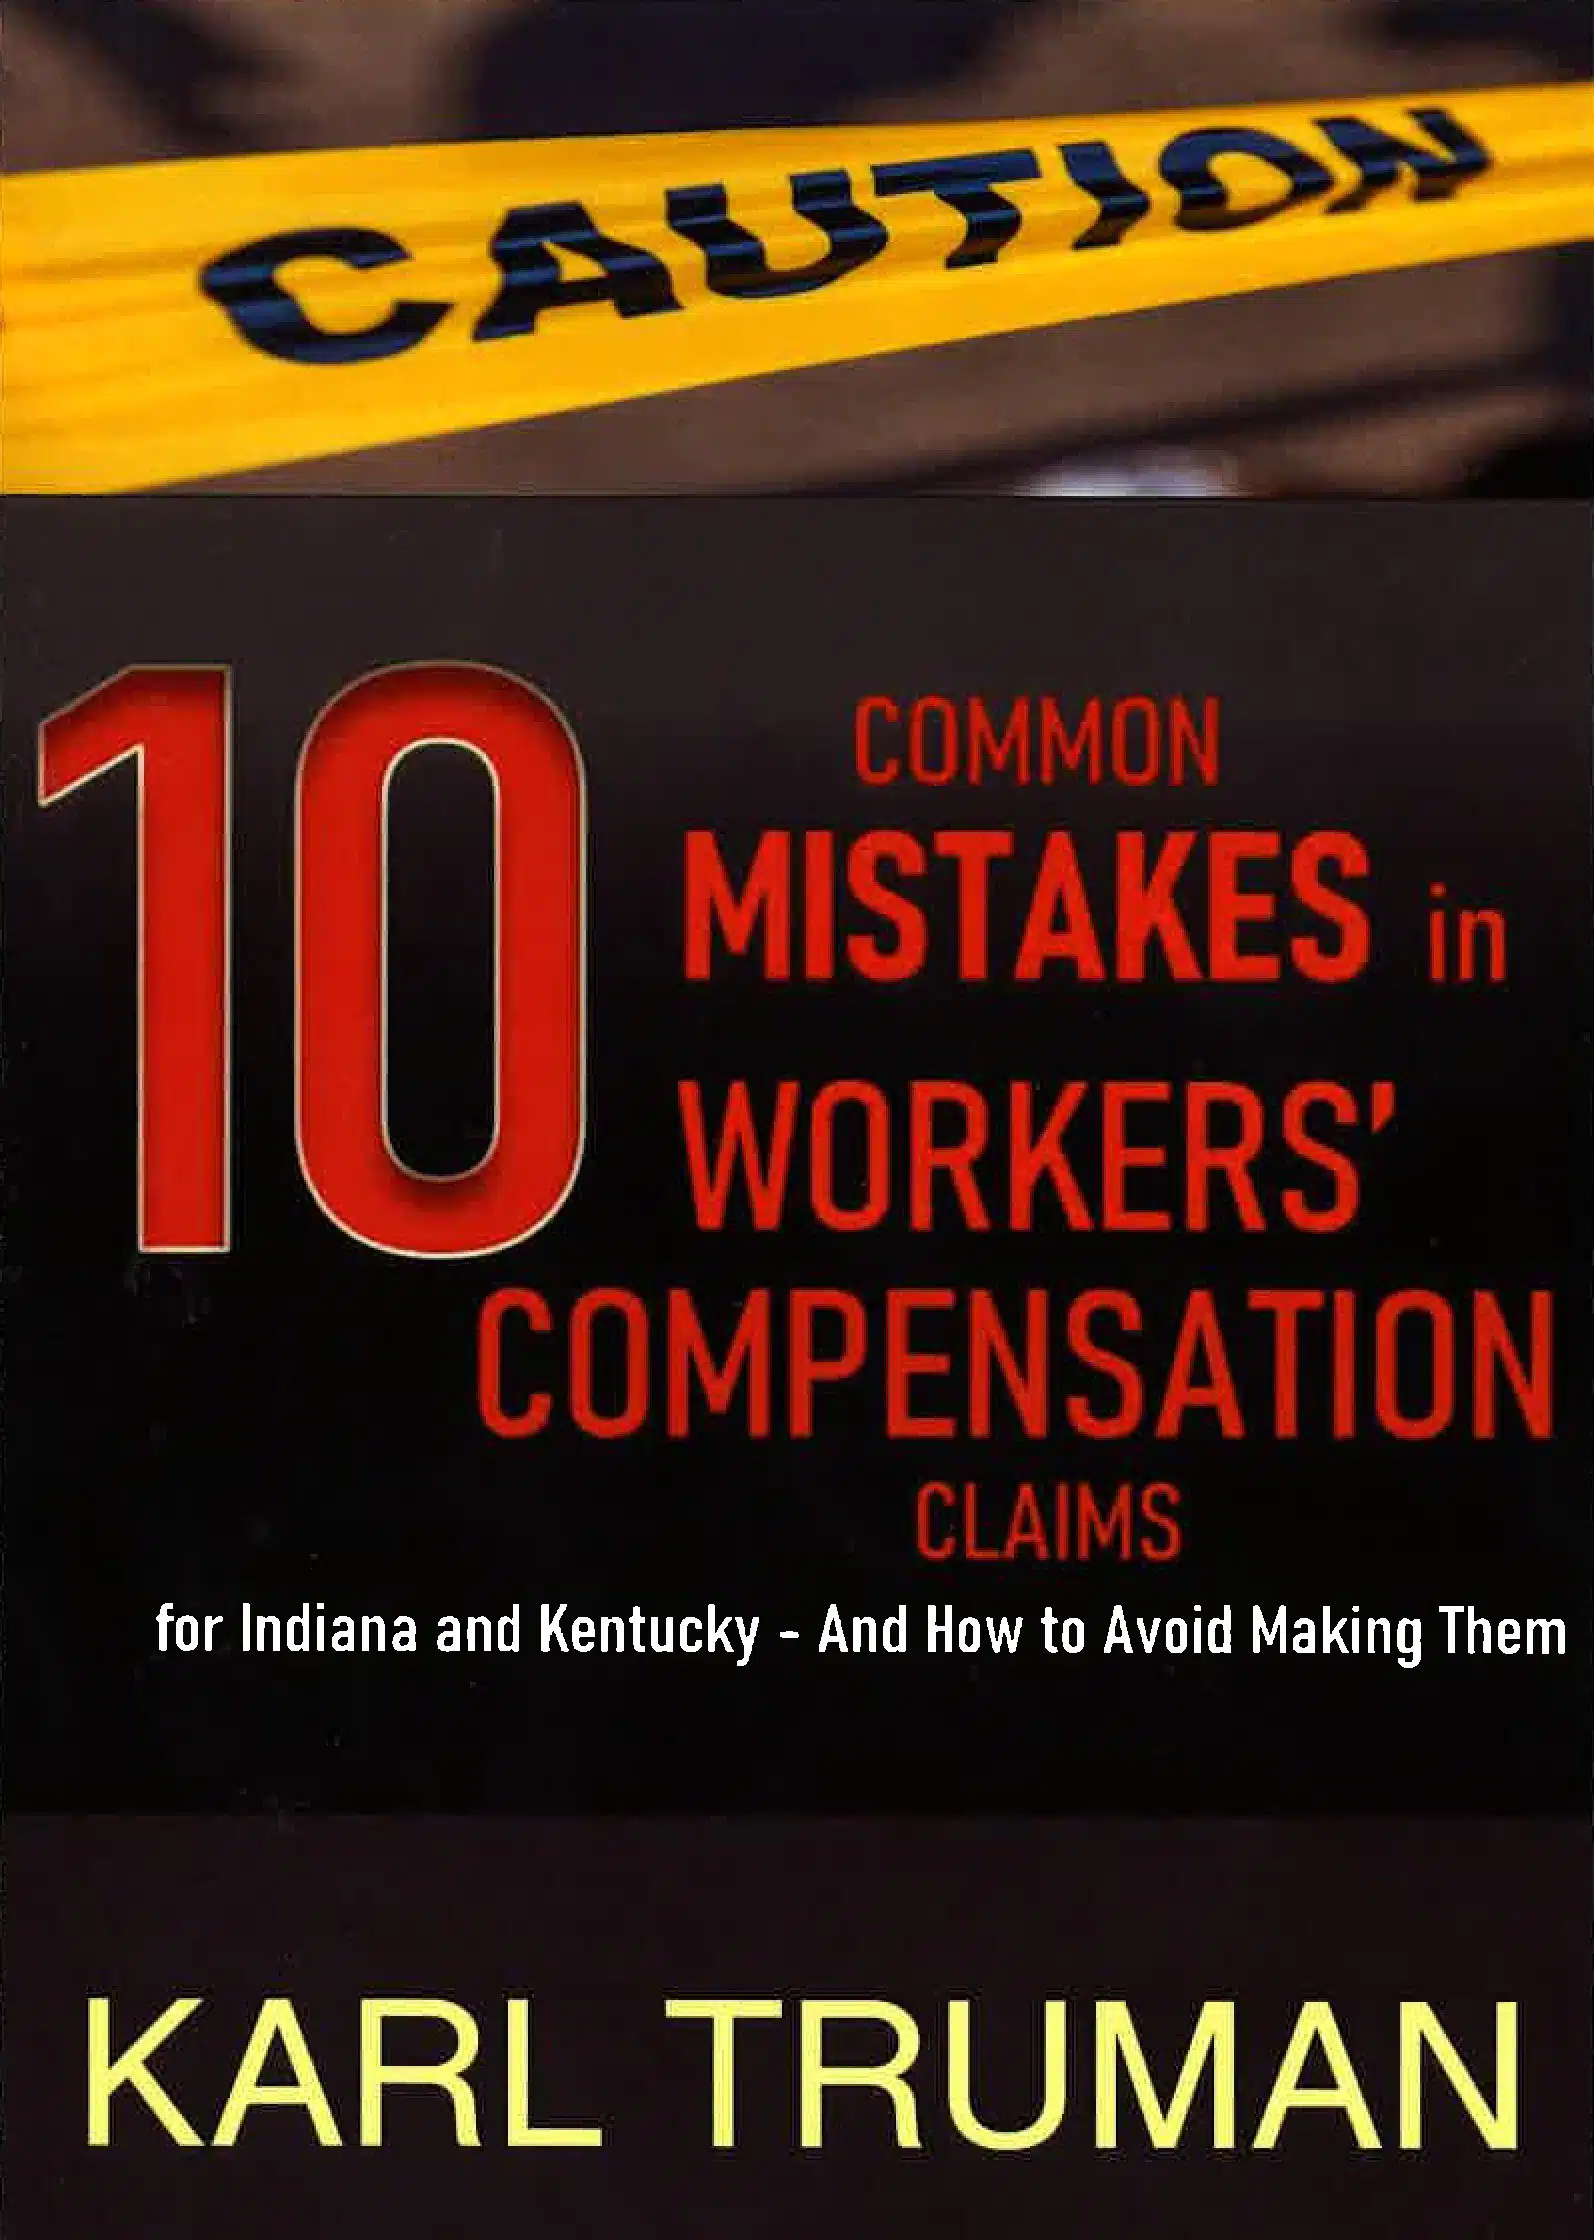 10 Common Mistakes in Workers' Compensation Claims